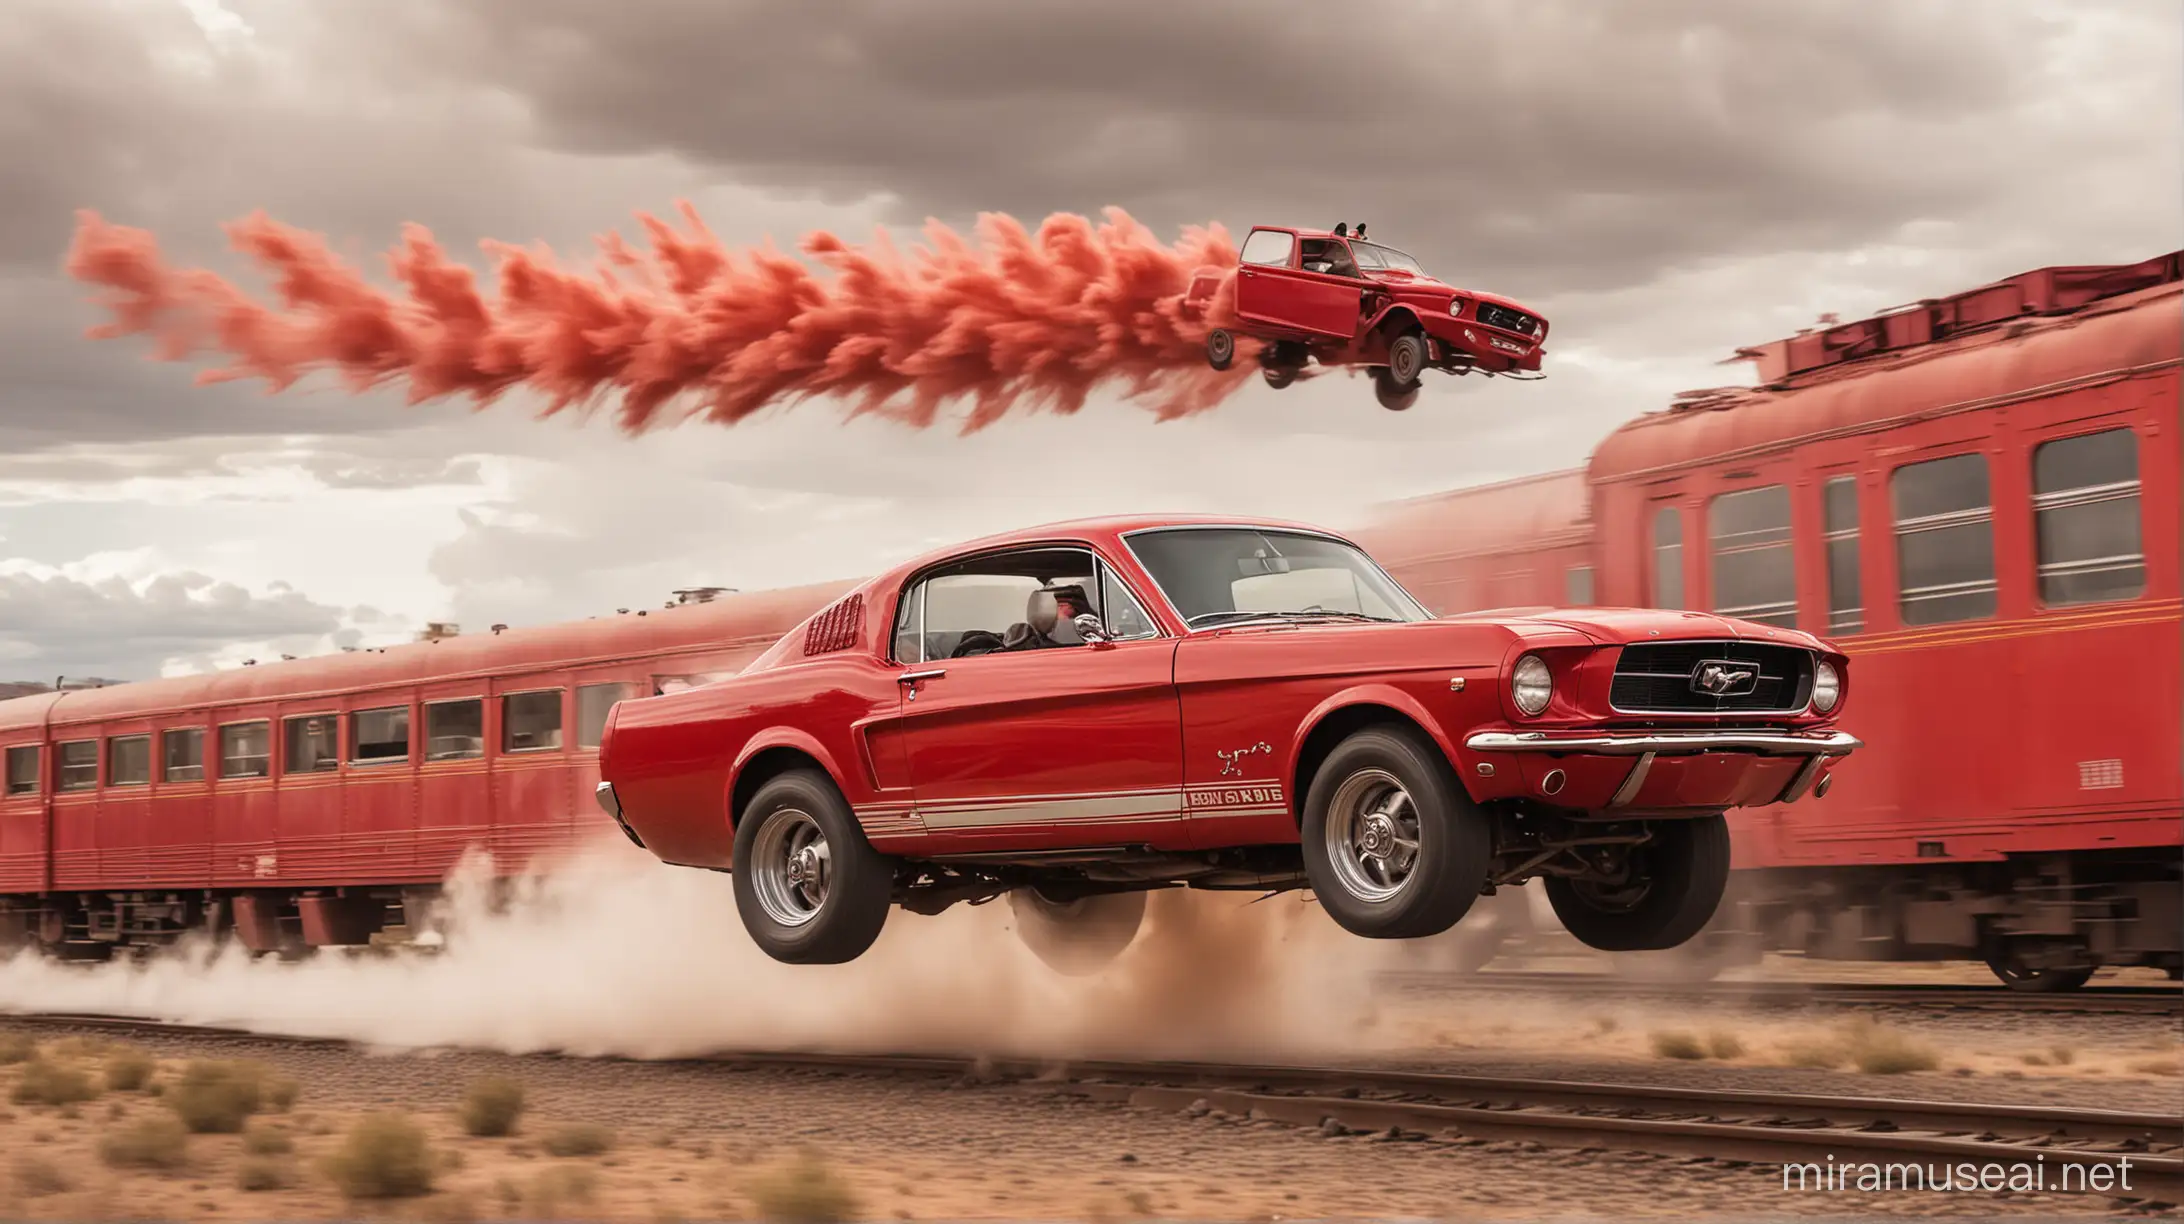 Dynamic Red Mustang Jumping Over Speeding Train